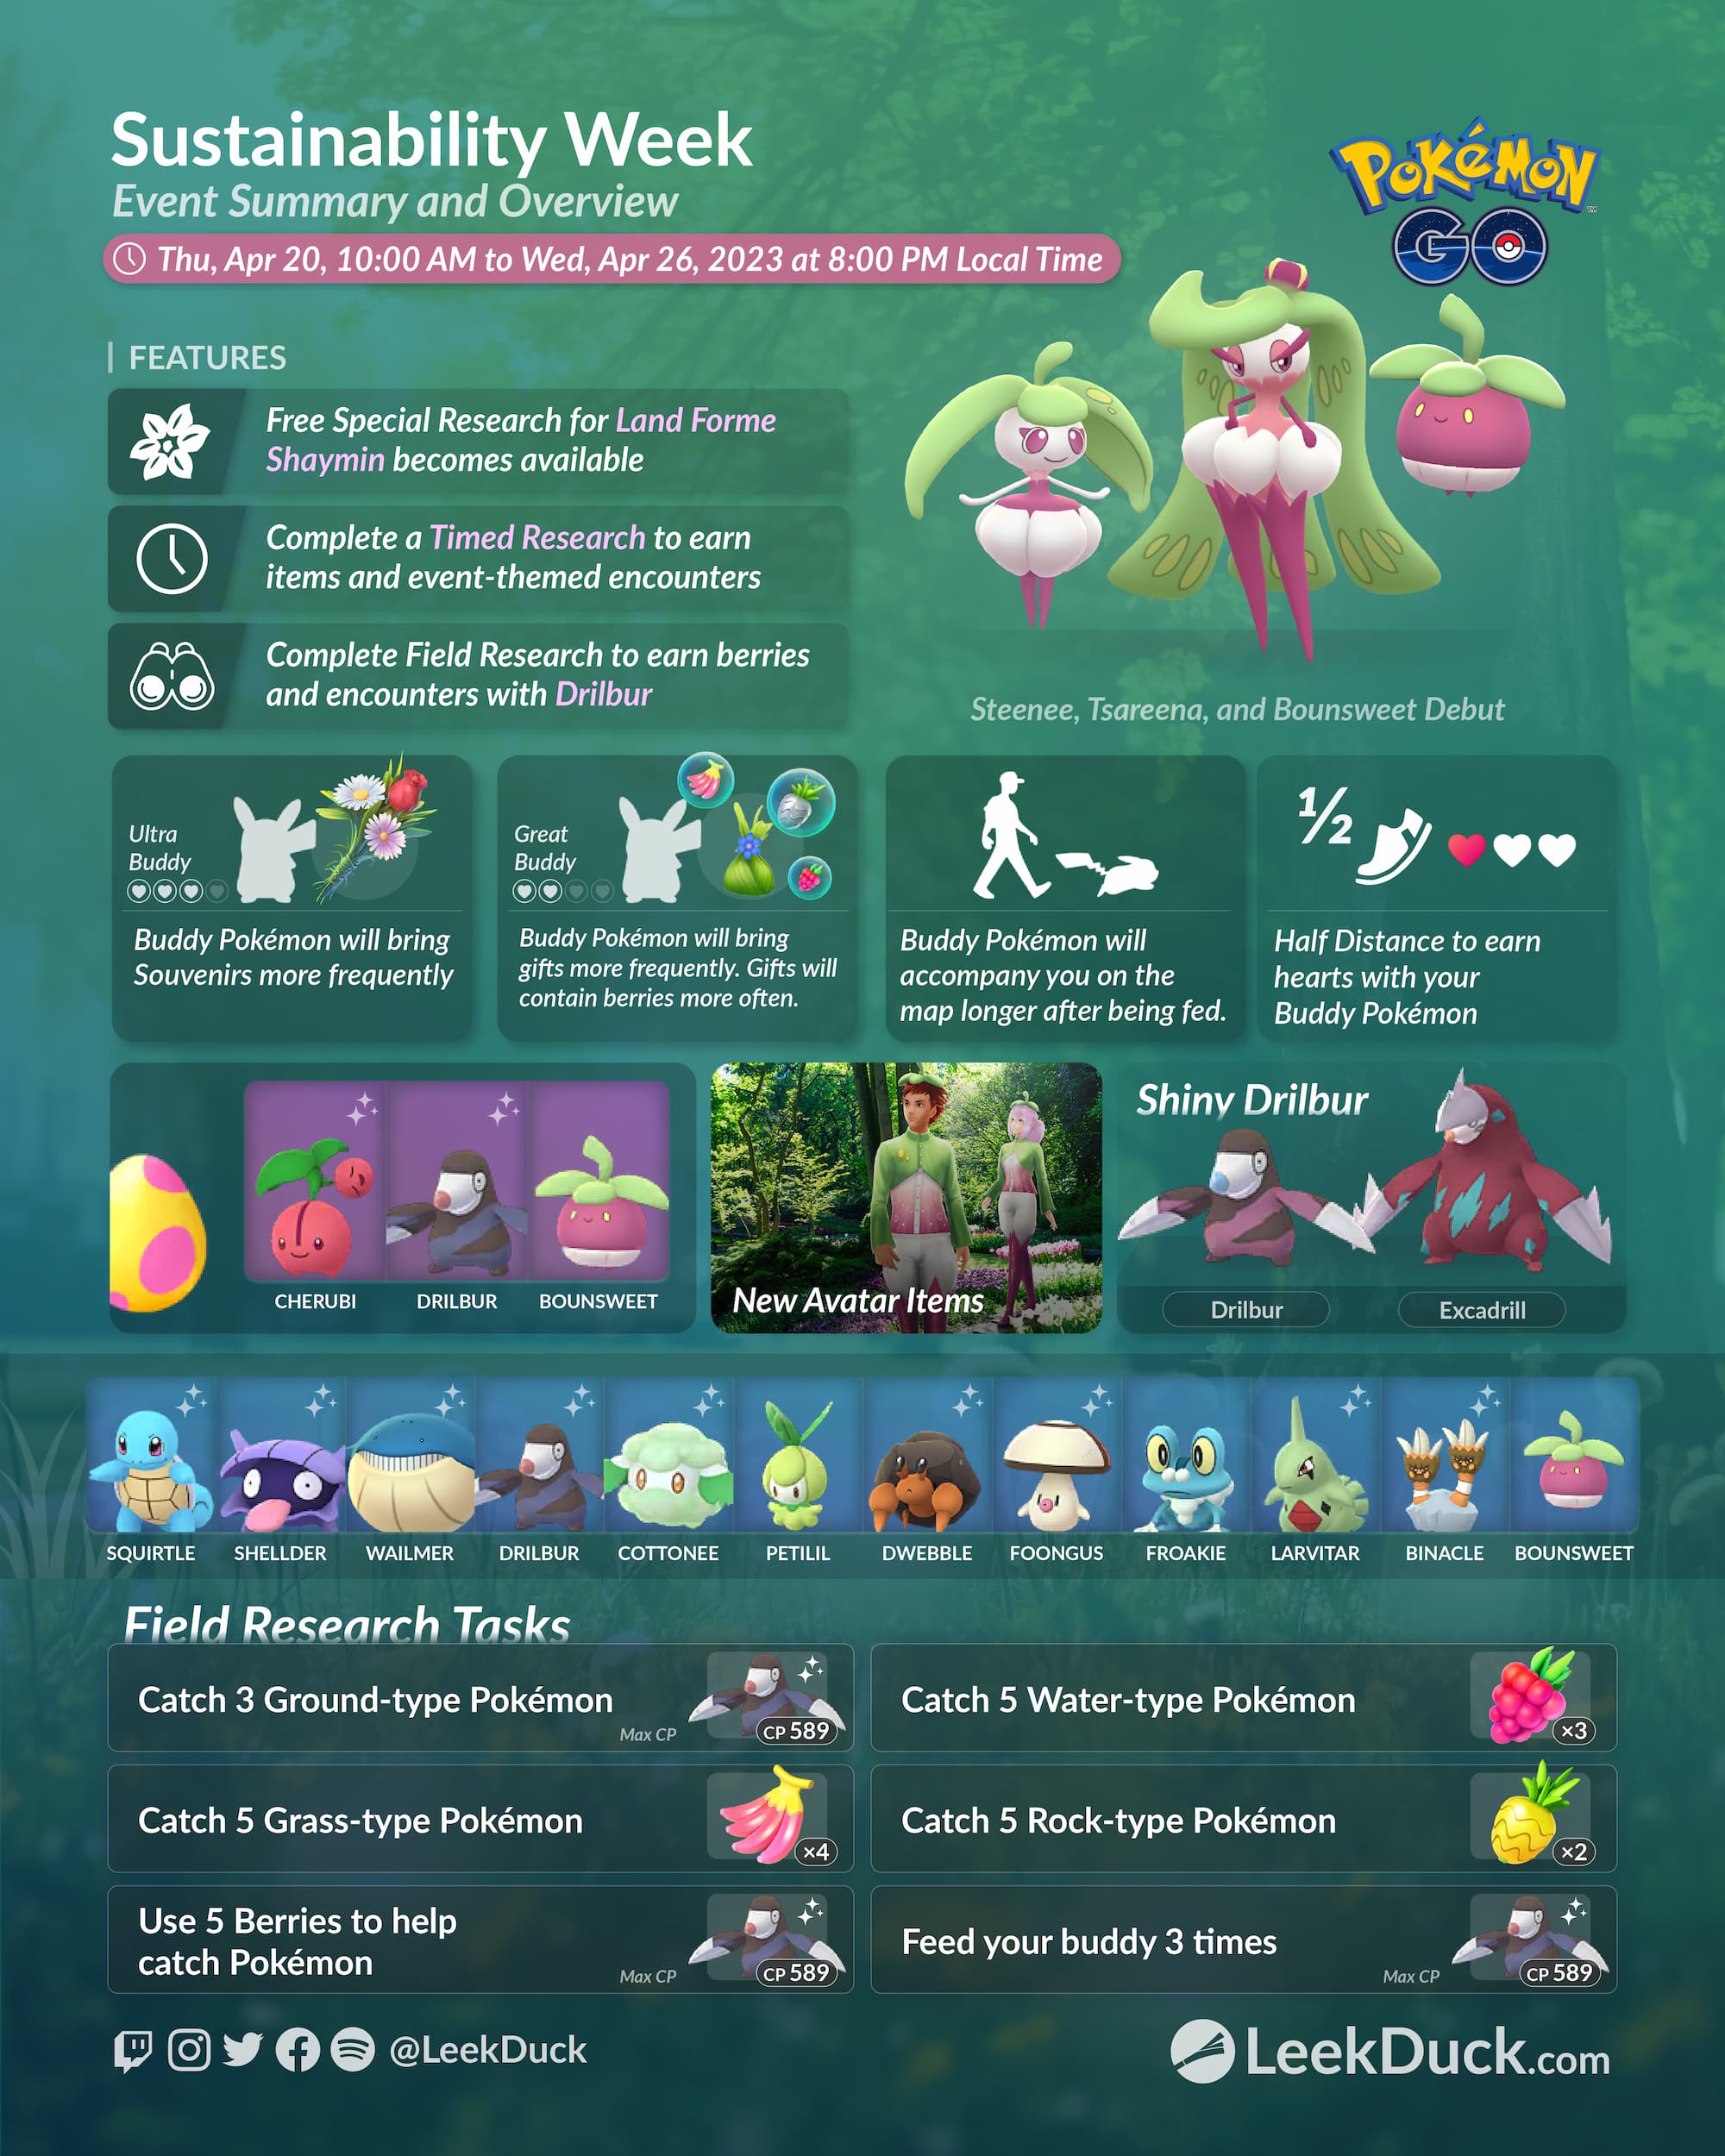 finished the shaymin task, how good was your shaymin? : r/pokemongo